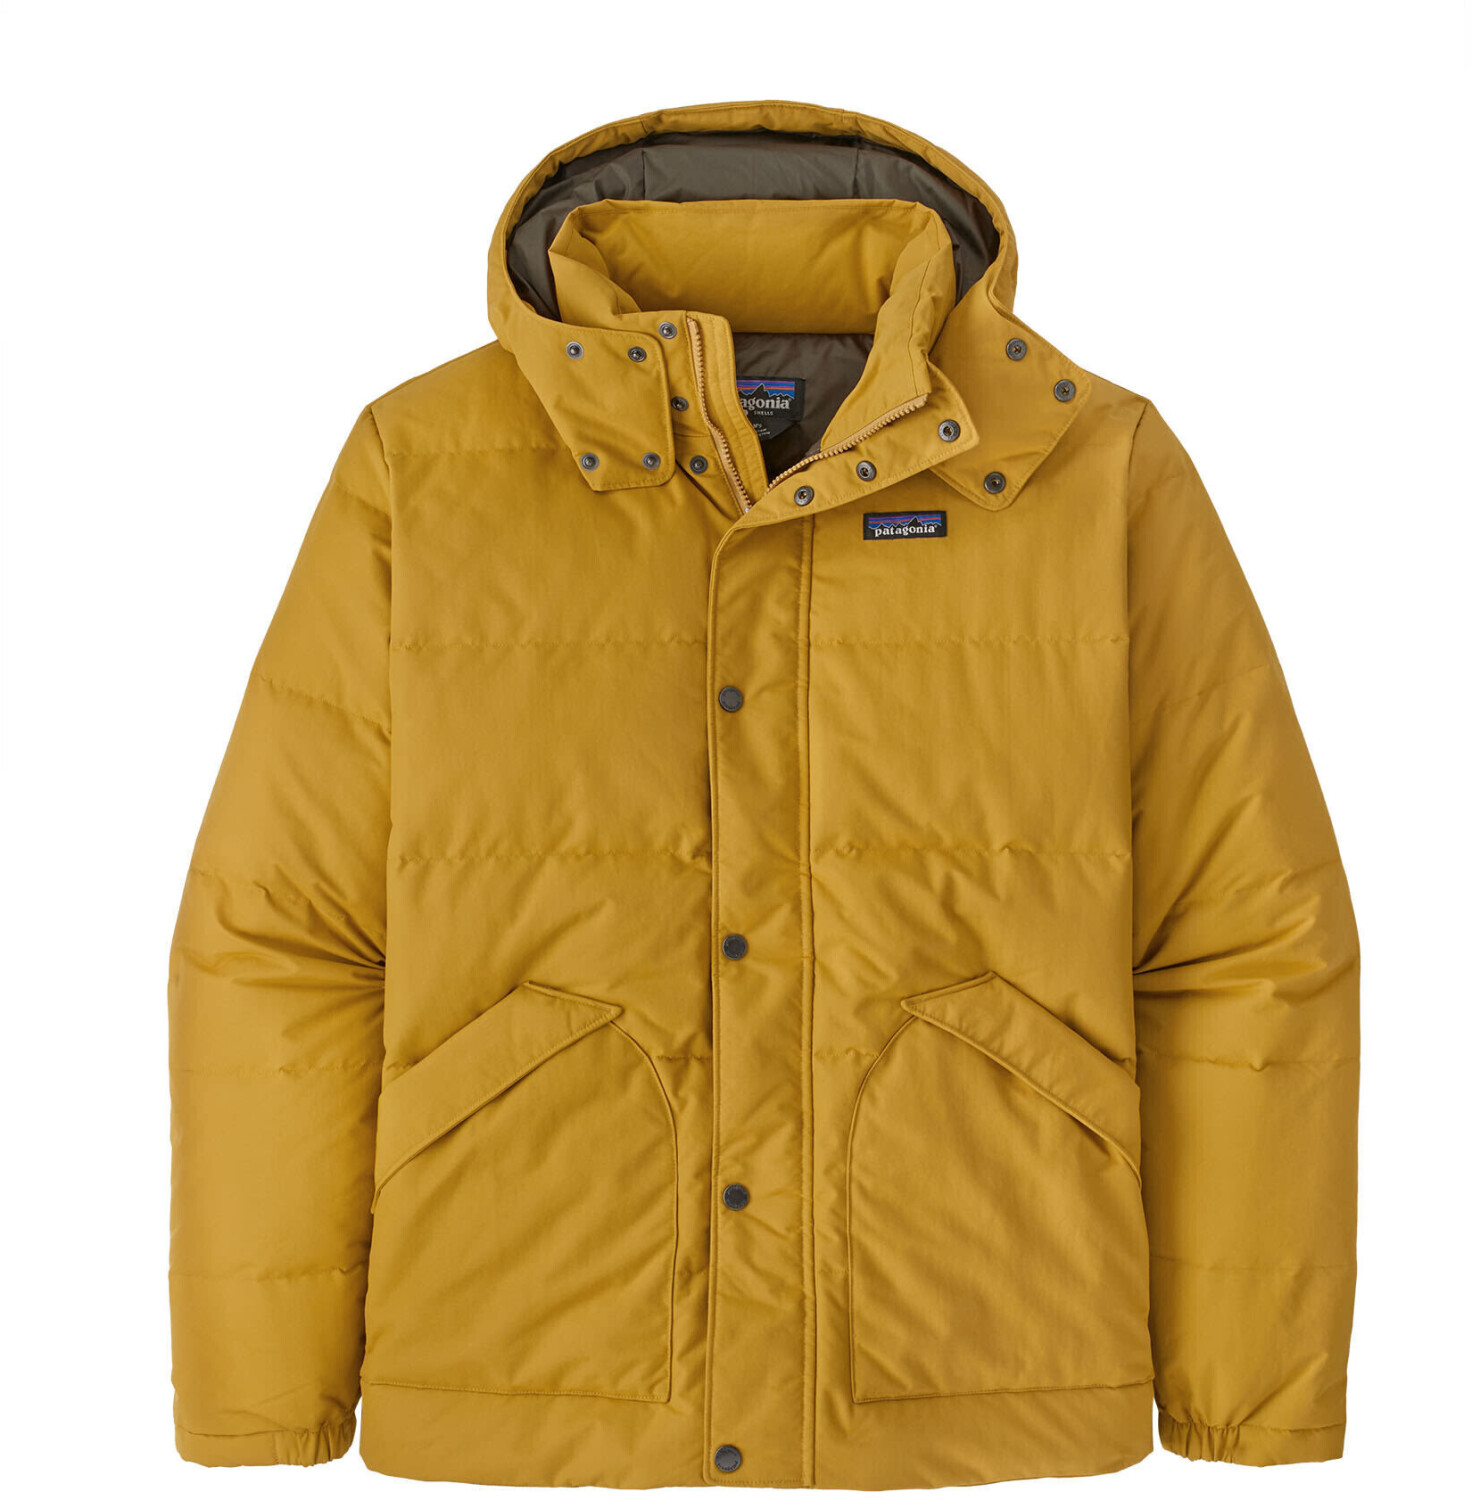 Buy Patagonia Downdrift Jacket cabin gold from £147.90 (Today